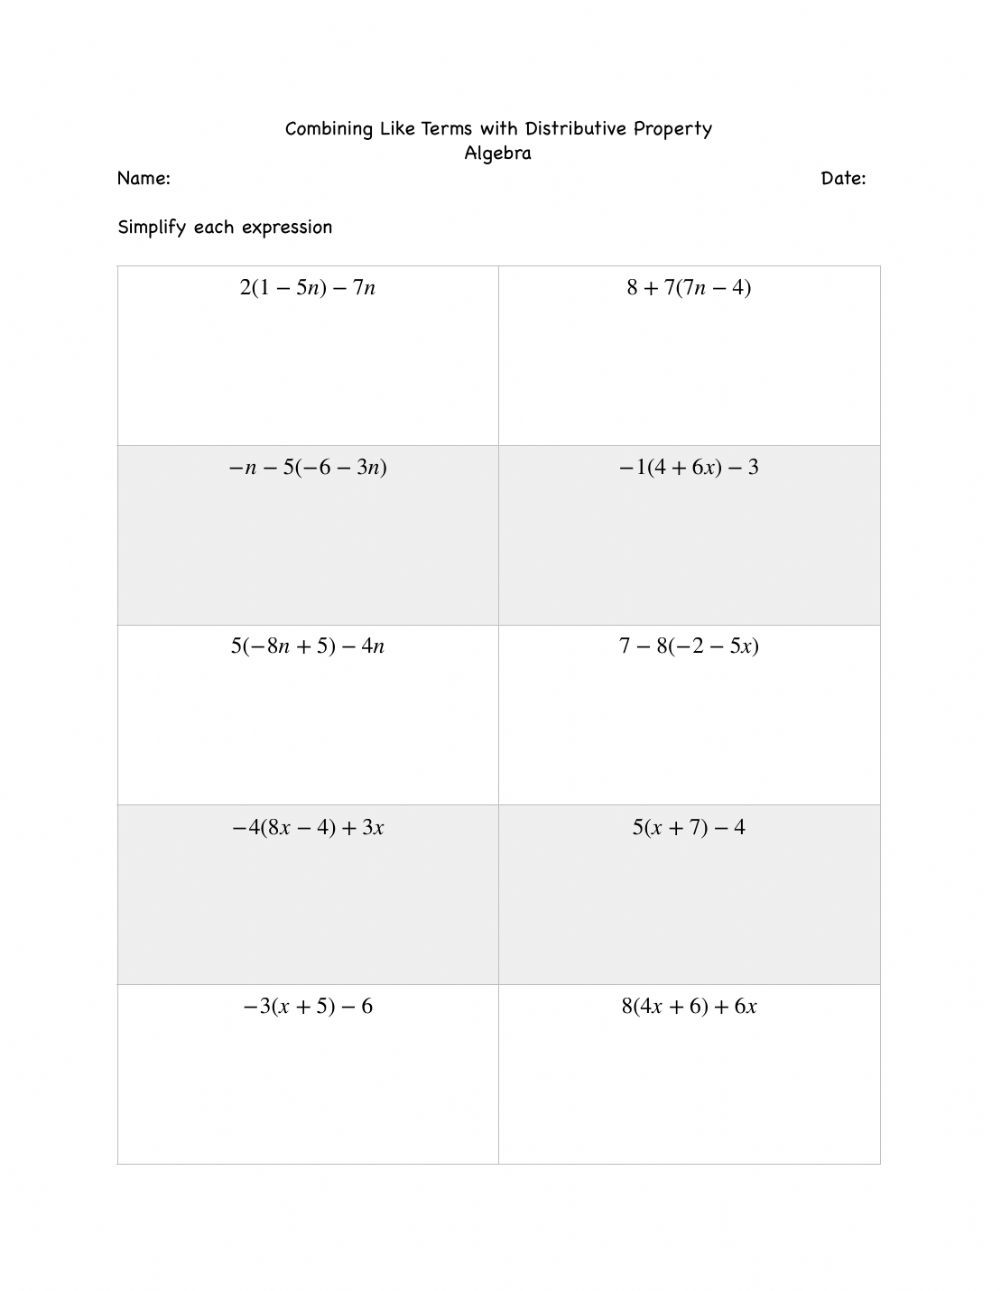 Combining Like Terms Worksheet Pdf Bining Like Terms with Distributive Property Practice